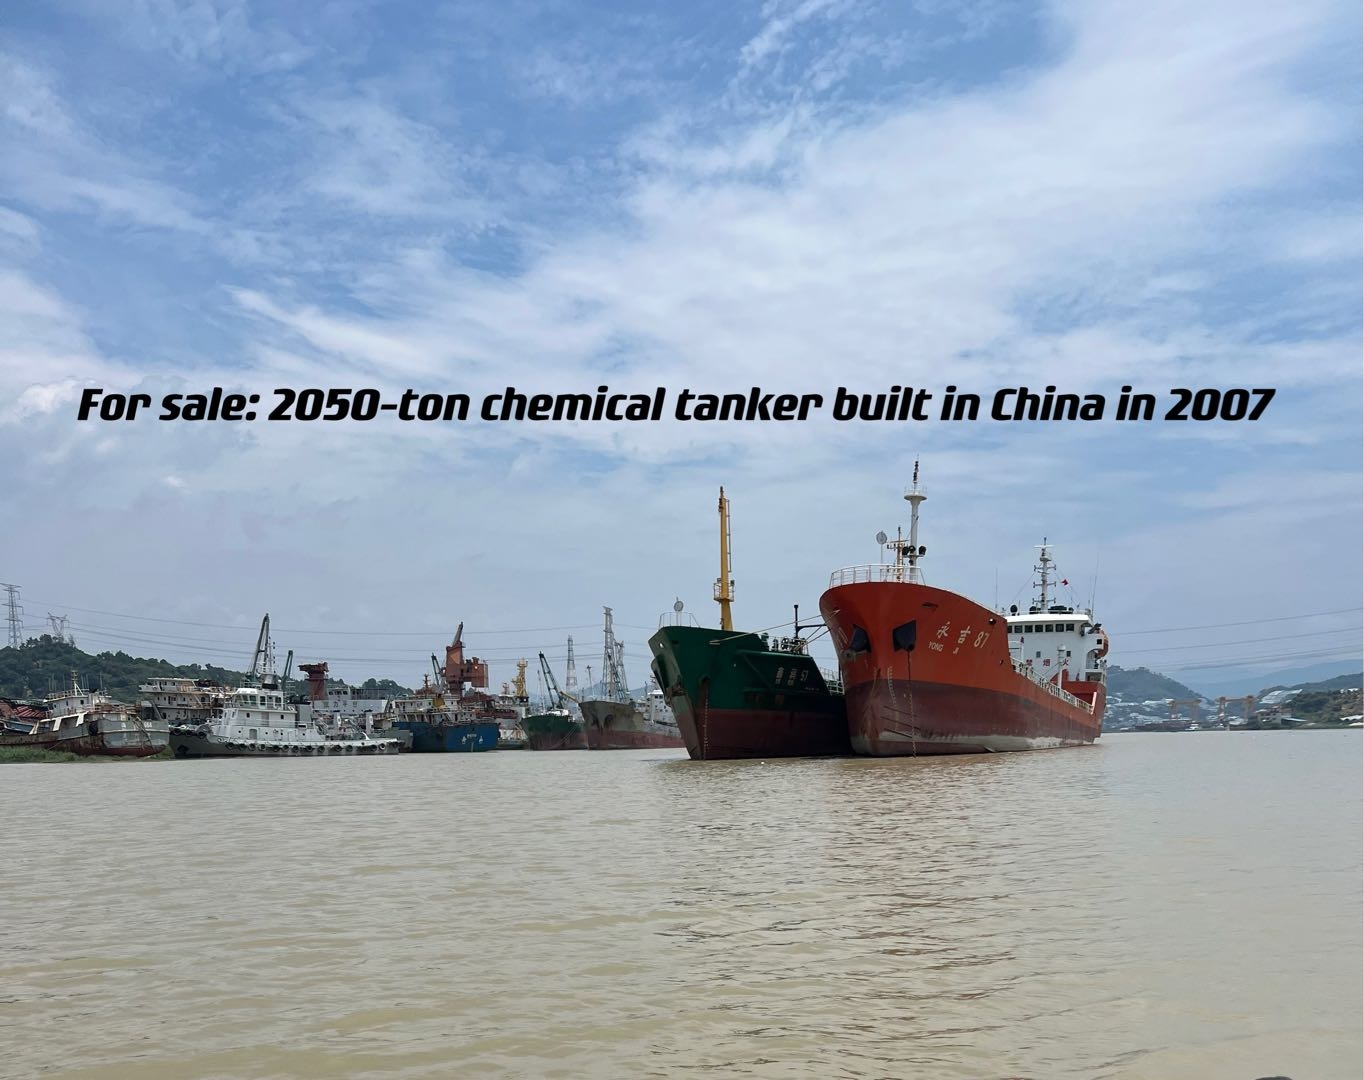 For sale: China built a 2050-ton chemical oil tanker in 2007